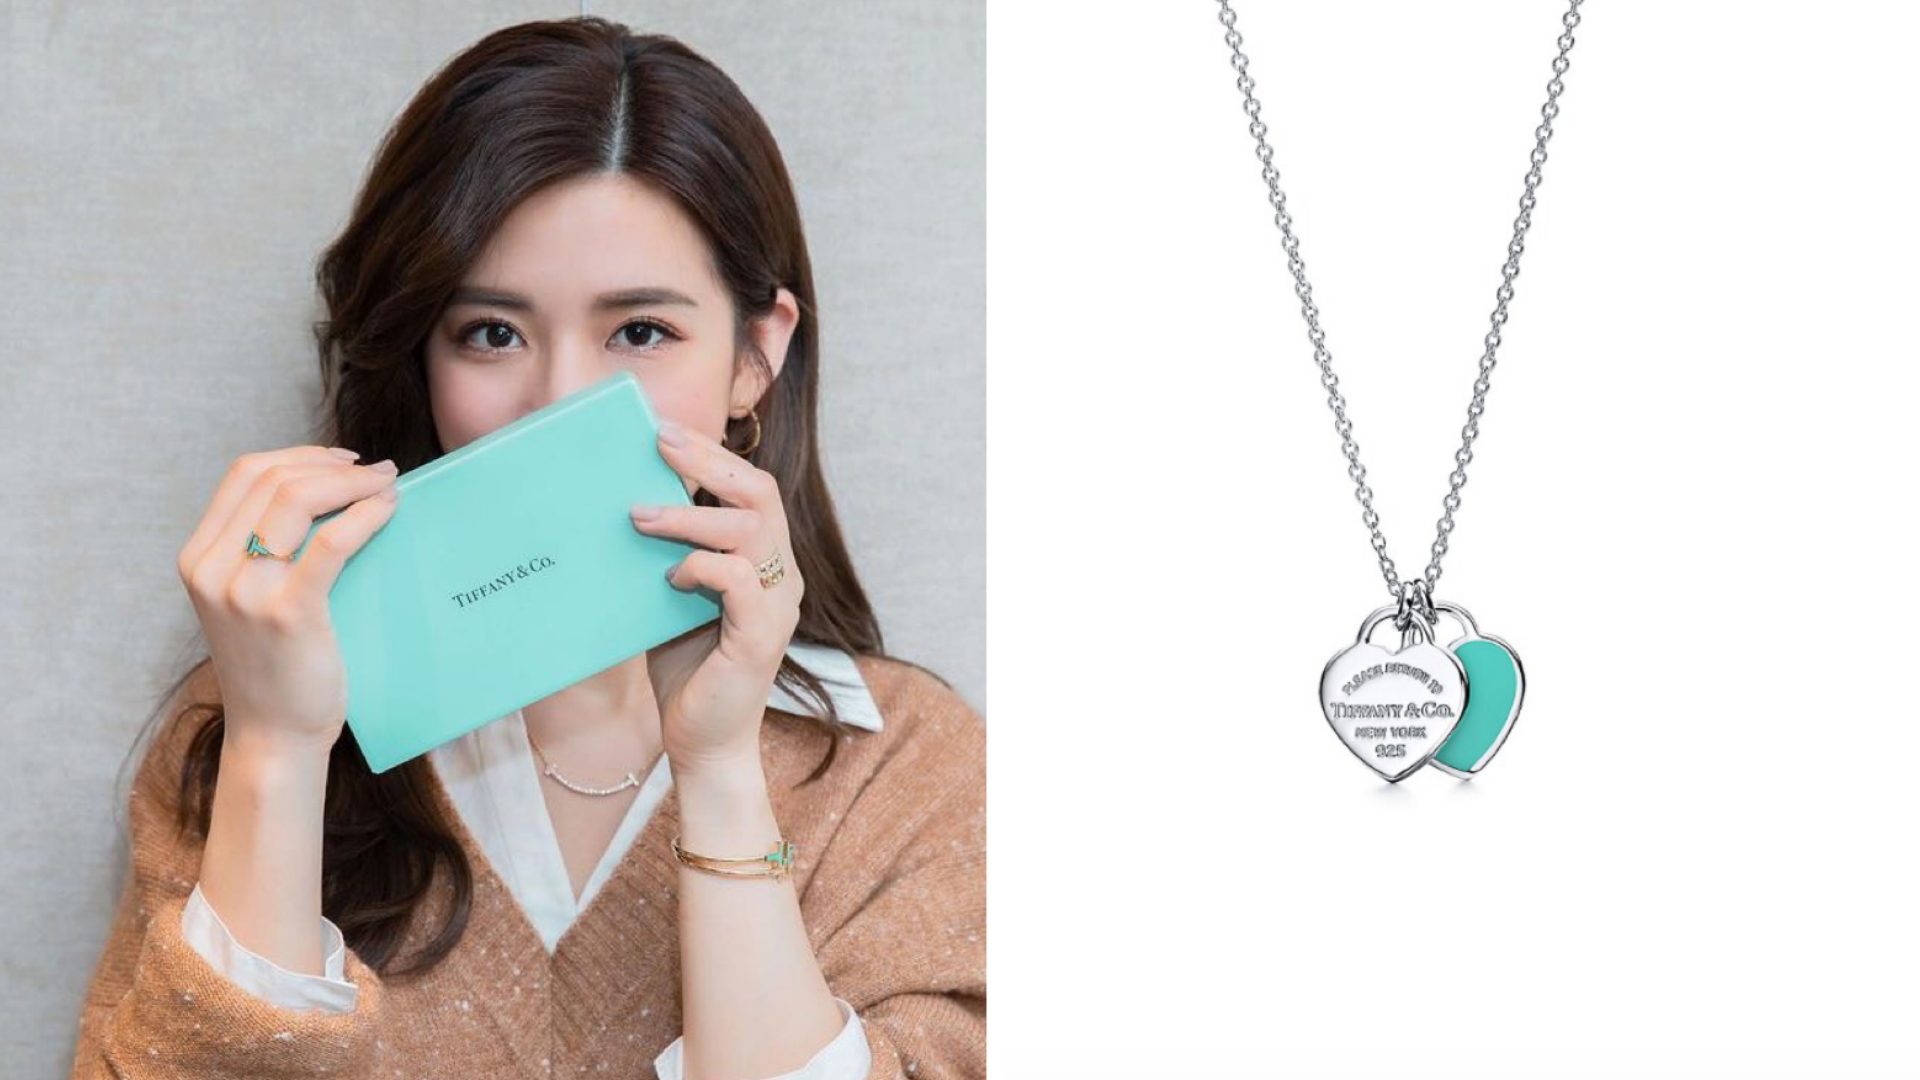 cheapest thing in tiffany and co